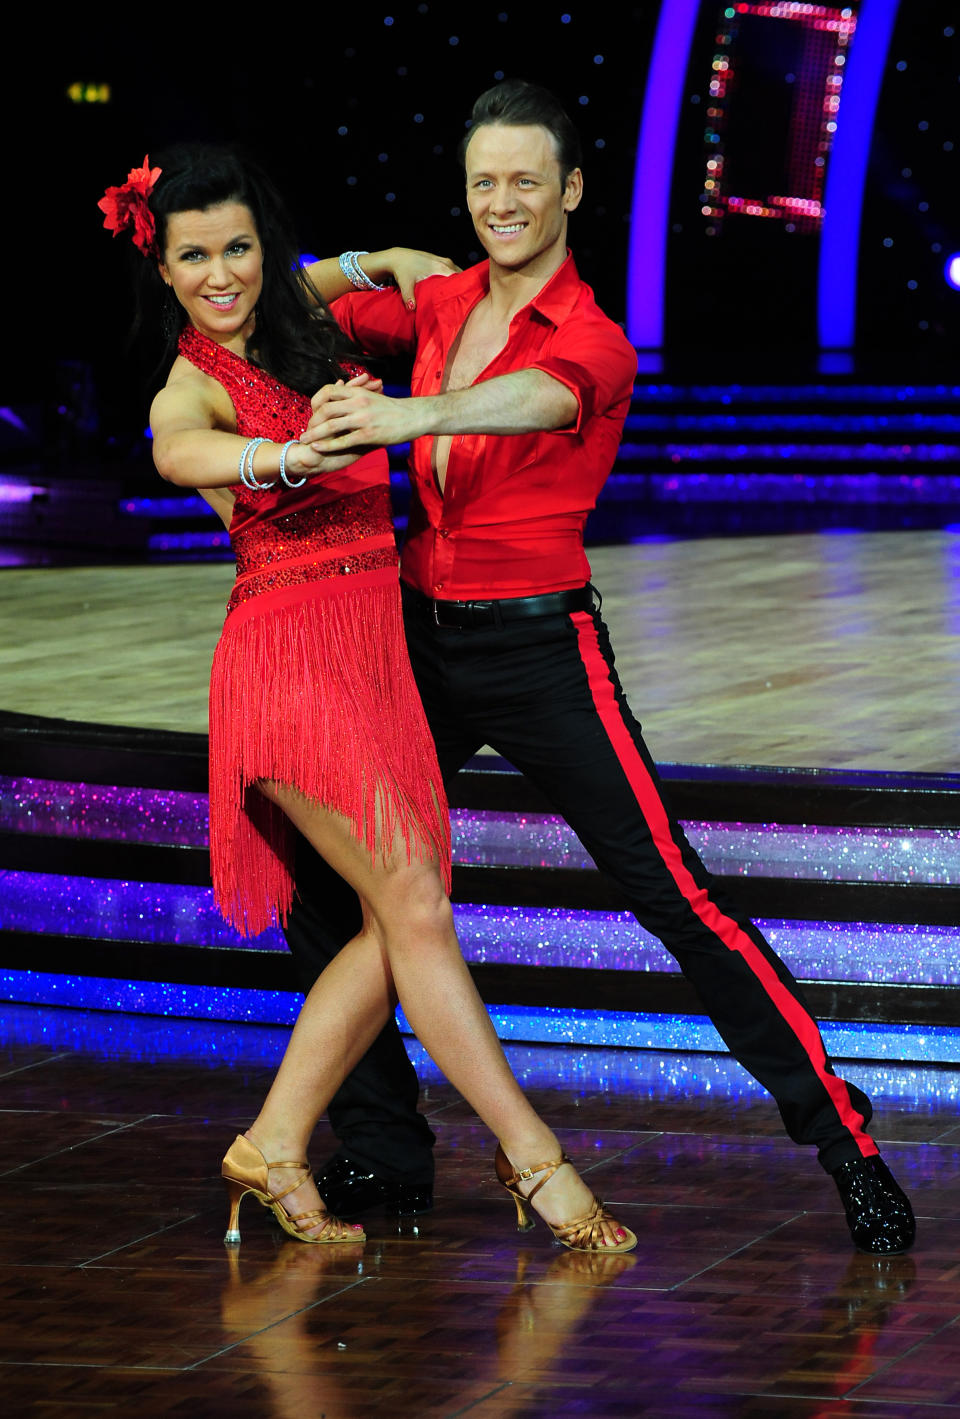 Susanna Reid and Kevin Clifton during a press call for the UK Strictly Come Dancing Live Tour 2014 starting in Birmingham on Friday at the National Indoor Arena, Birmingham.